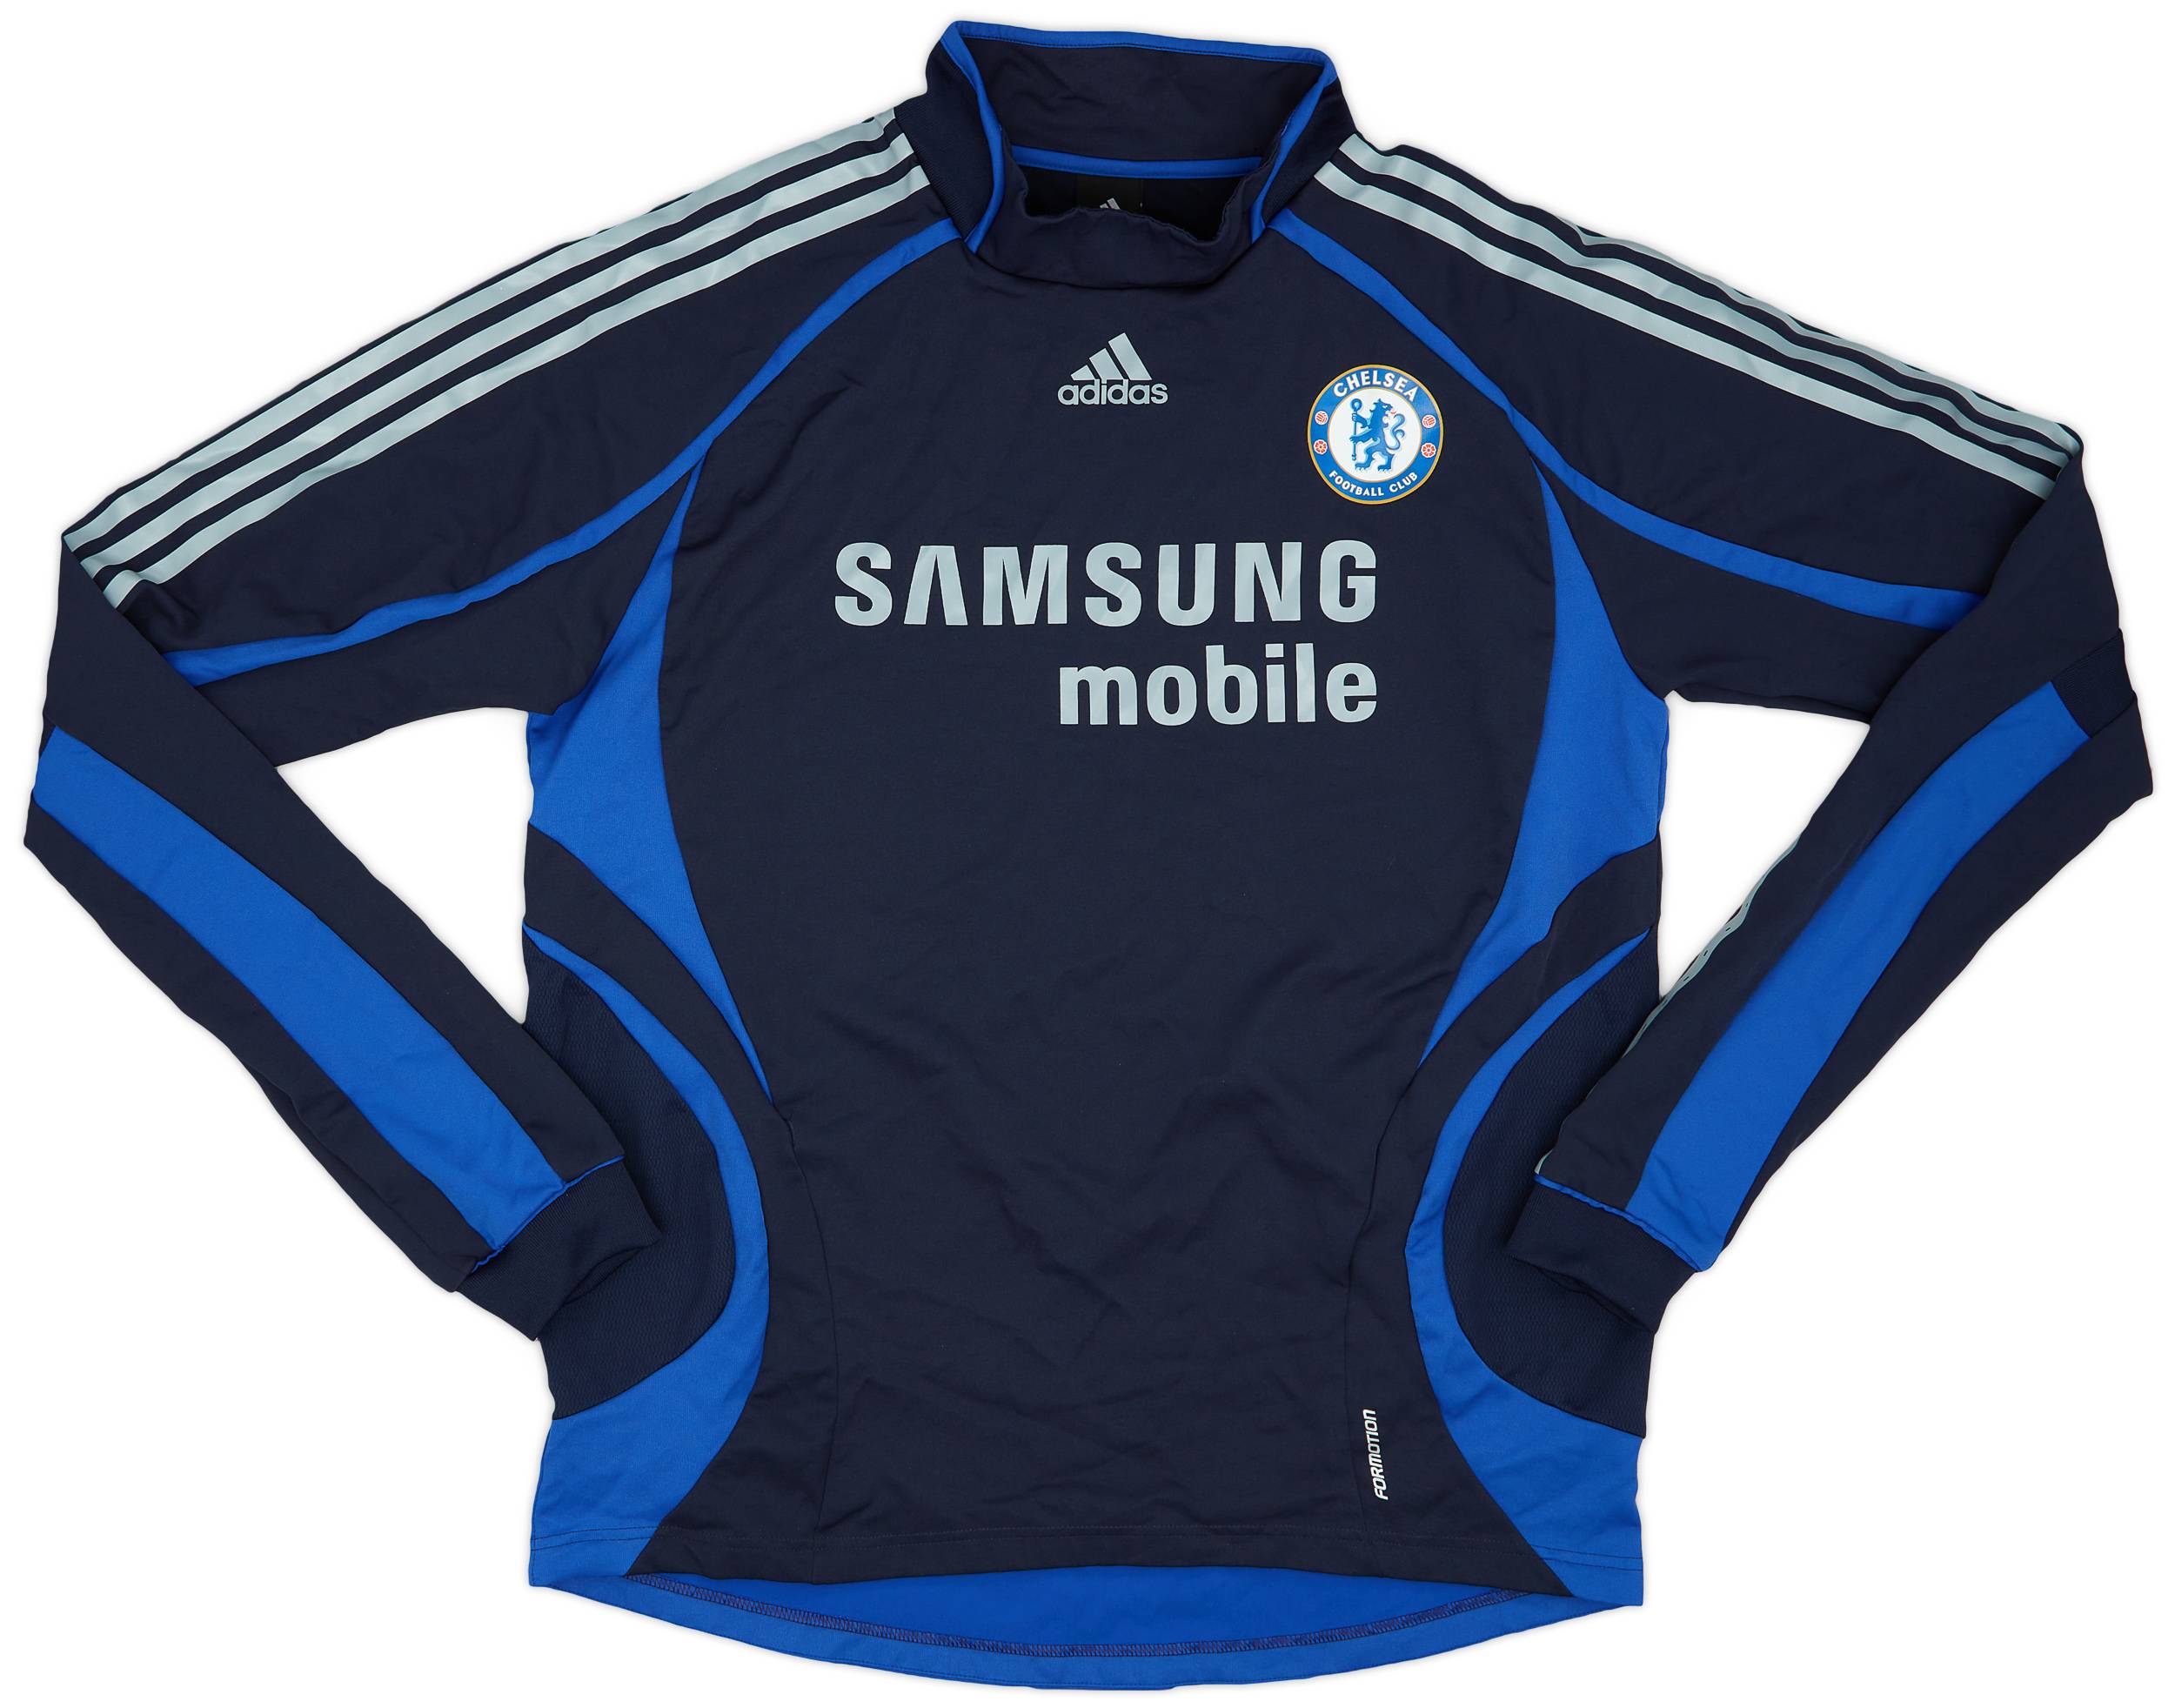 2006-07 Chelsea adidas Formotion Drill Top - 9/10 - (XL)